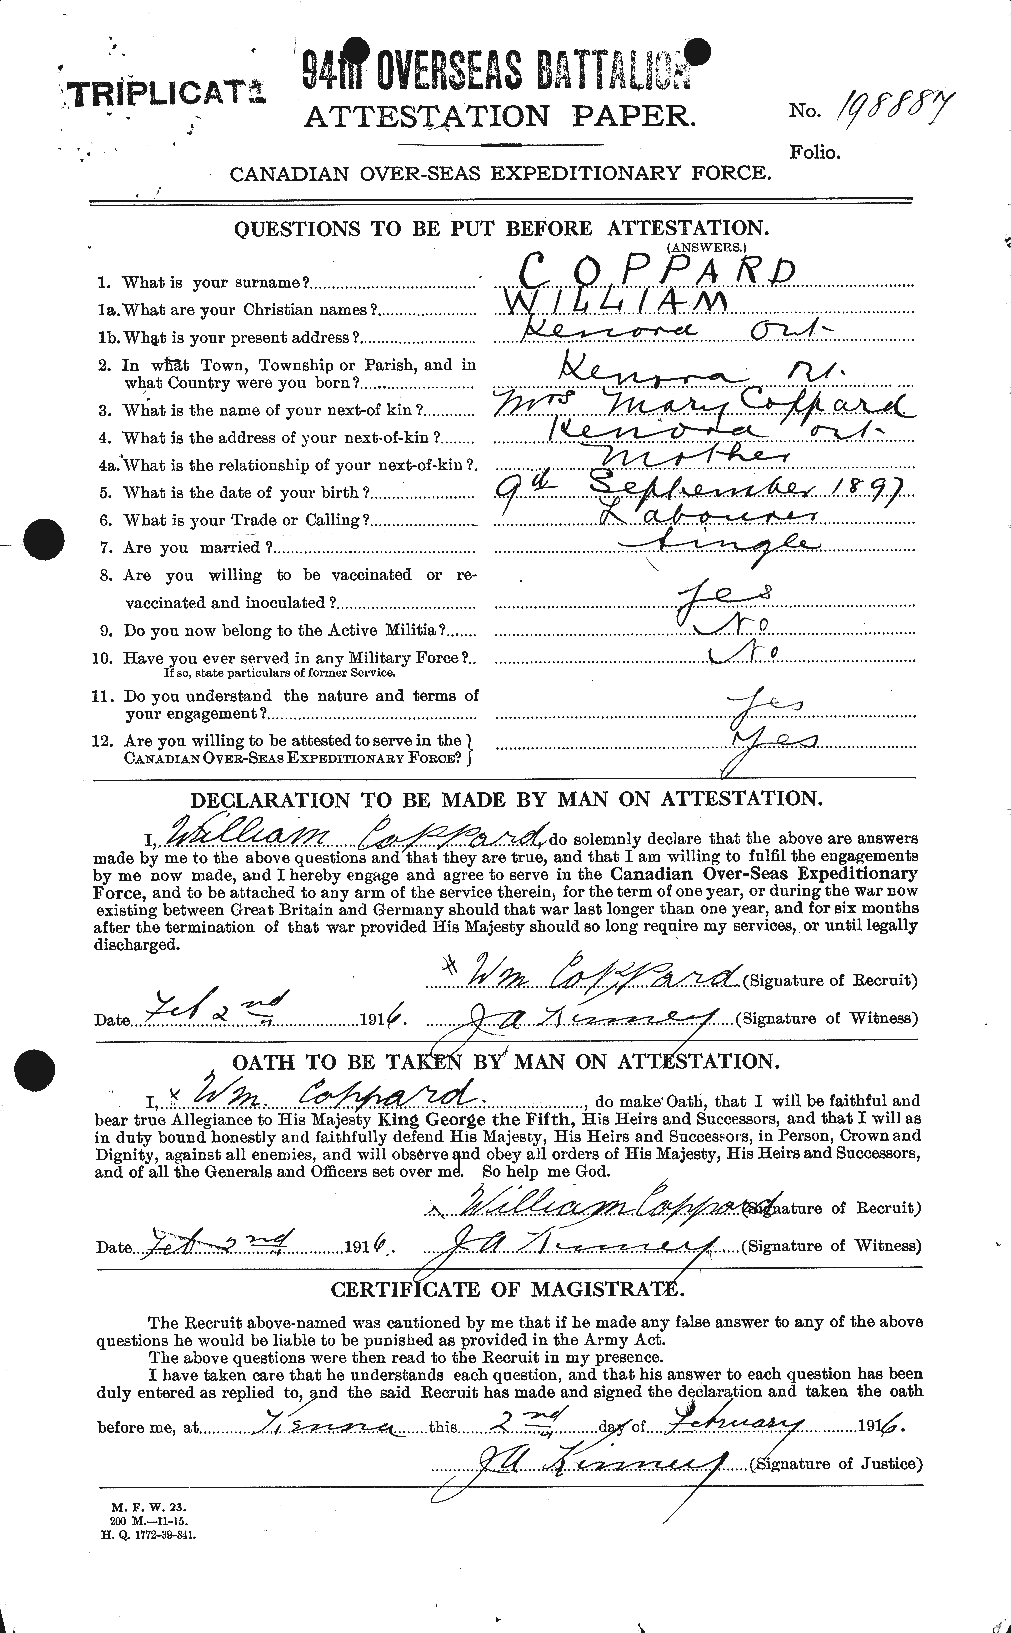 Personnel Records of the First World War - CEF 056219a